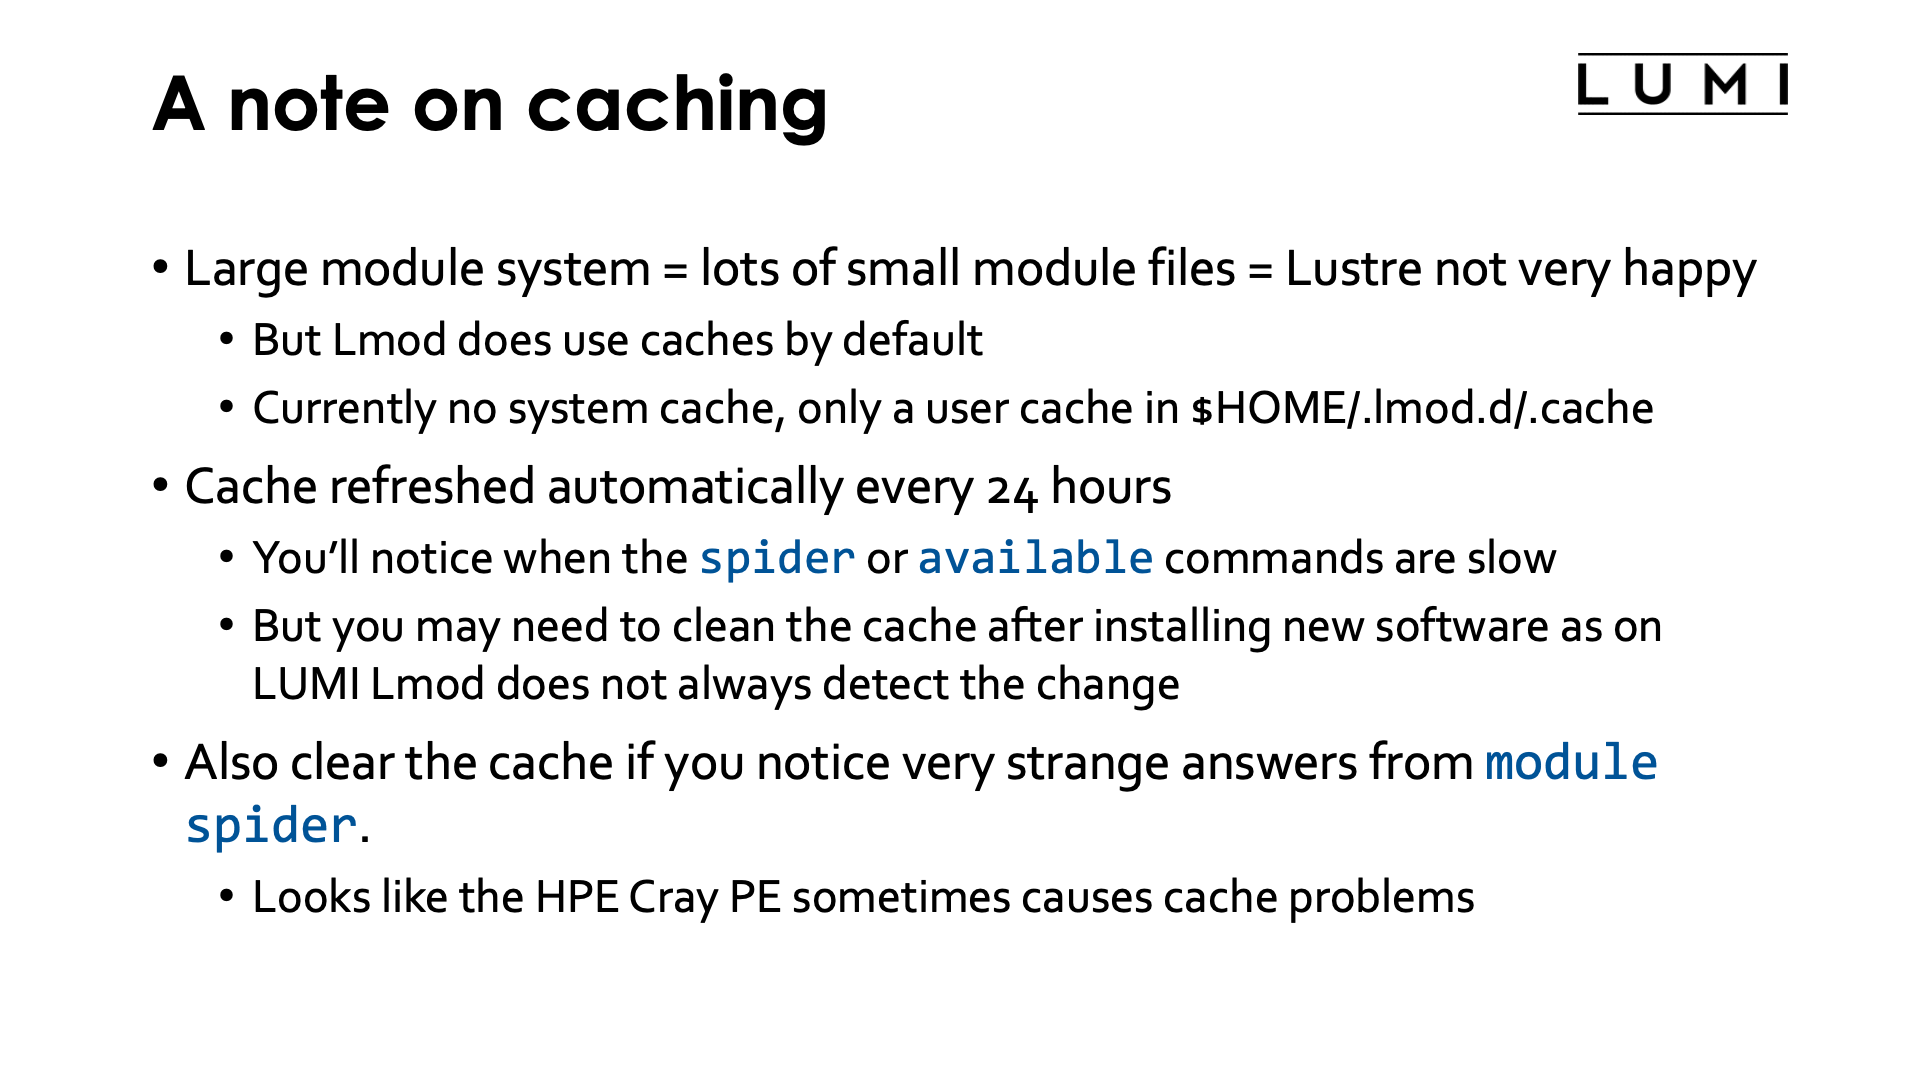 A note on caching